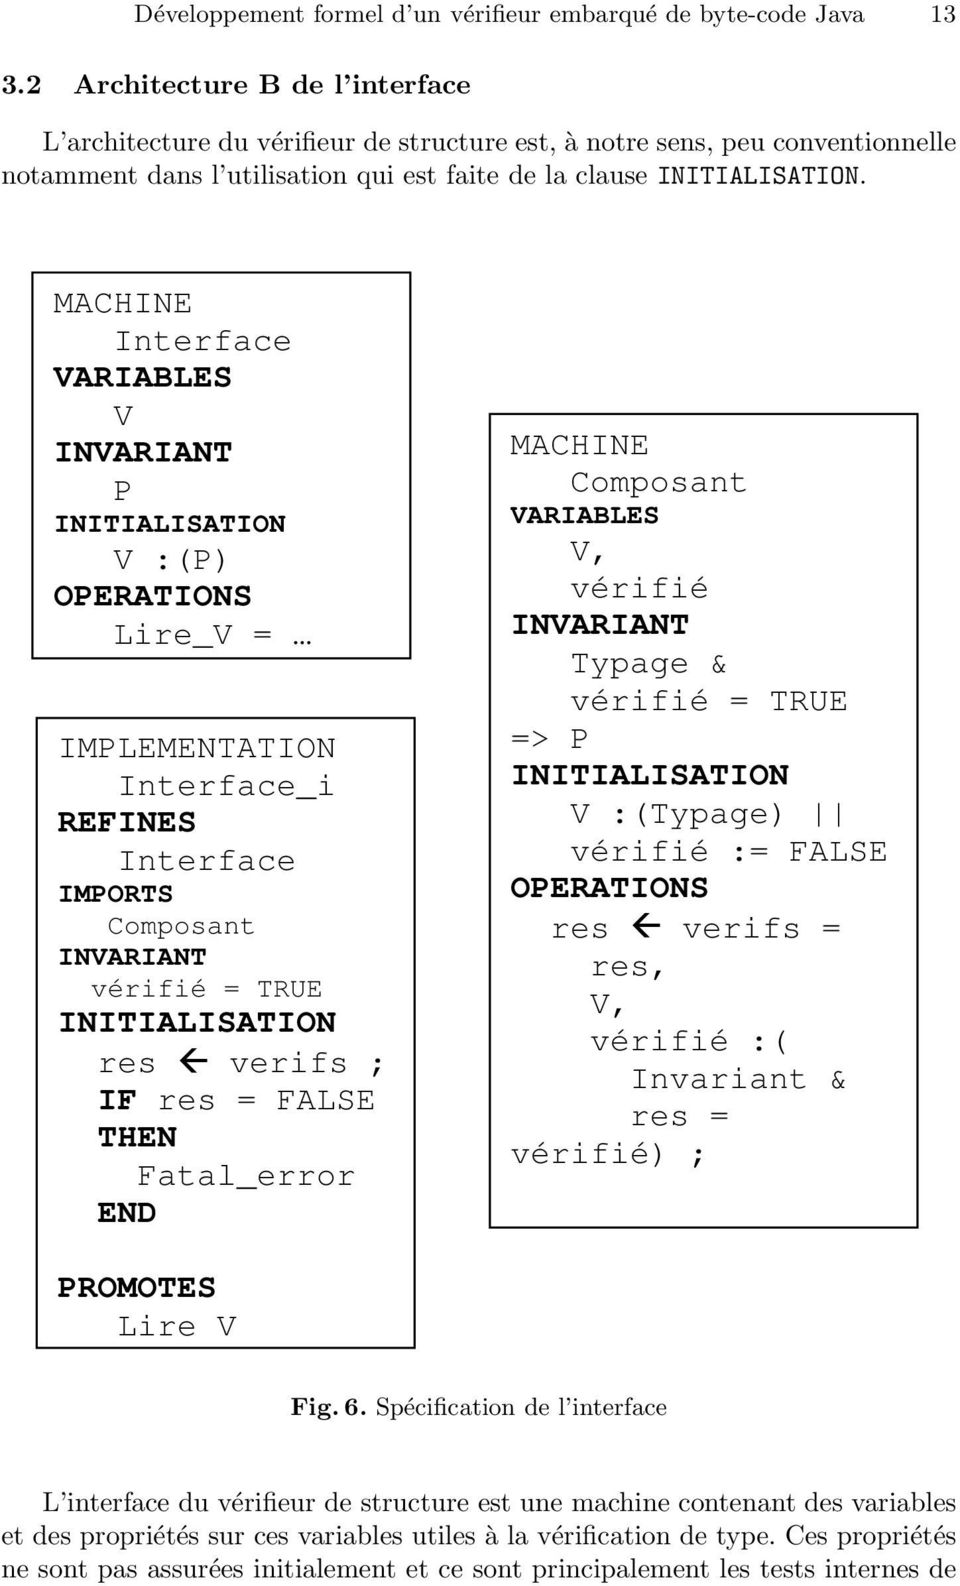 MACHINE Interface VARIABLES V INVARIANT P INITIALISATION V :(P) OPERATIONS Lire_V = IMPLEMENTATION Interface_i REFINES Interface IMPORTS Composant INVARIANT vérifié = TRUE INITIALISATION res verifs ;